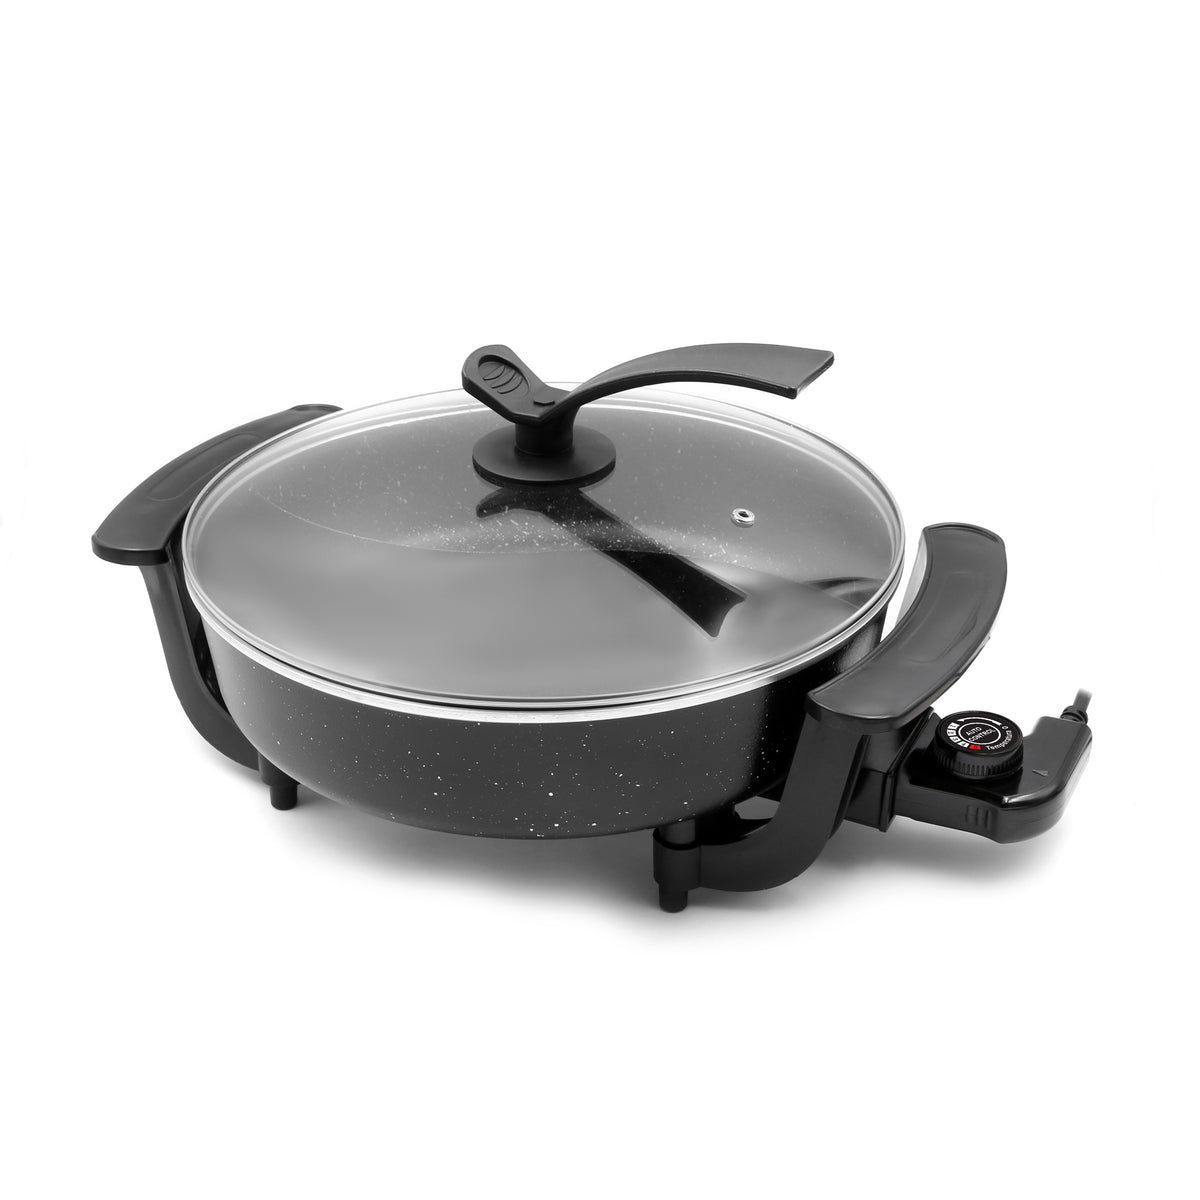 Electric Fry Pan with Cooking Divider.